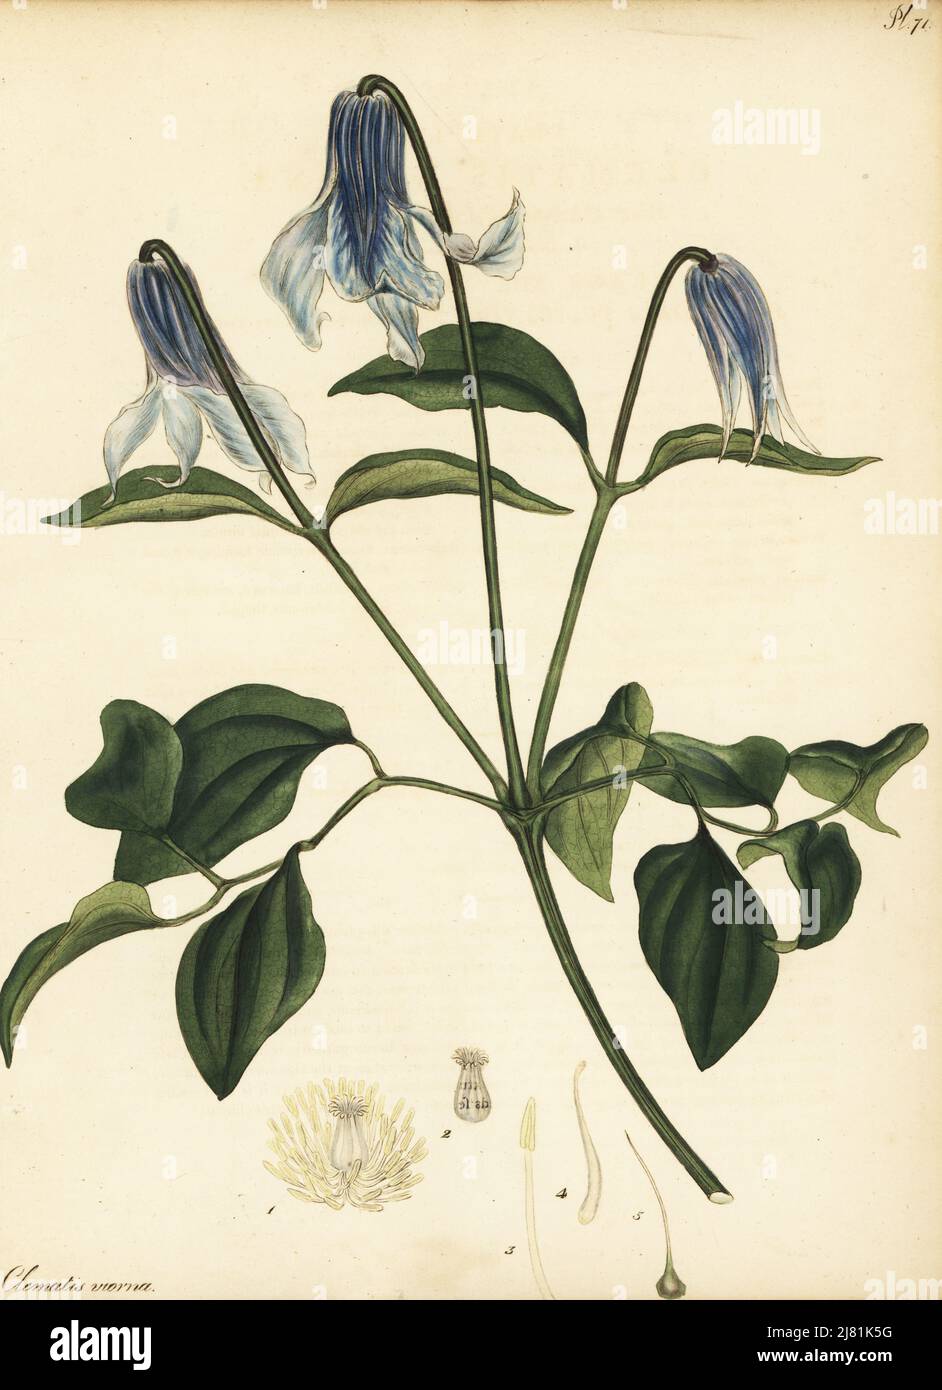 Vasevine or leatherflower, Clematis viorna. Southeastern United States. Blue thick-petaled virgin's bower. Copperplate engraving drawn, engraved and hand-coloured by Henry Andrews from his Botanical Register, Volume 1, published in London, 1799. Stock Photo